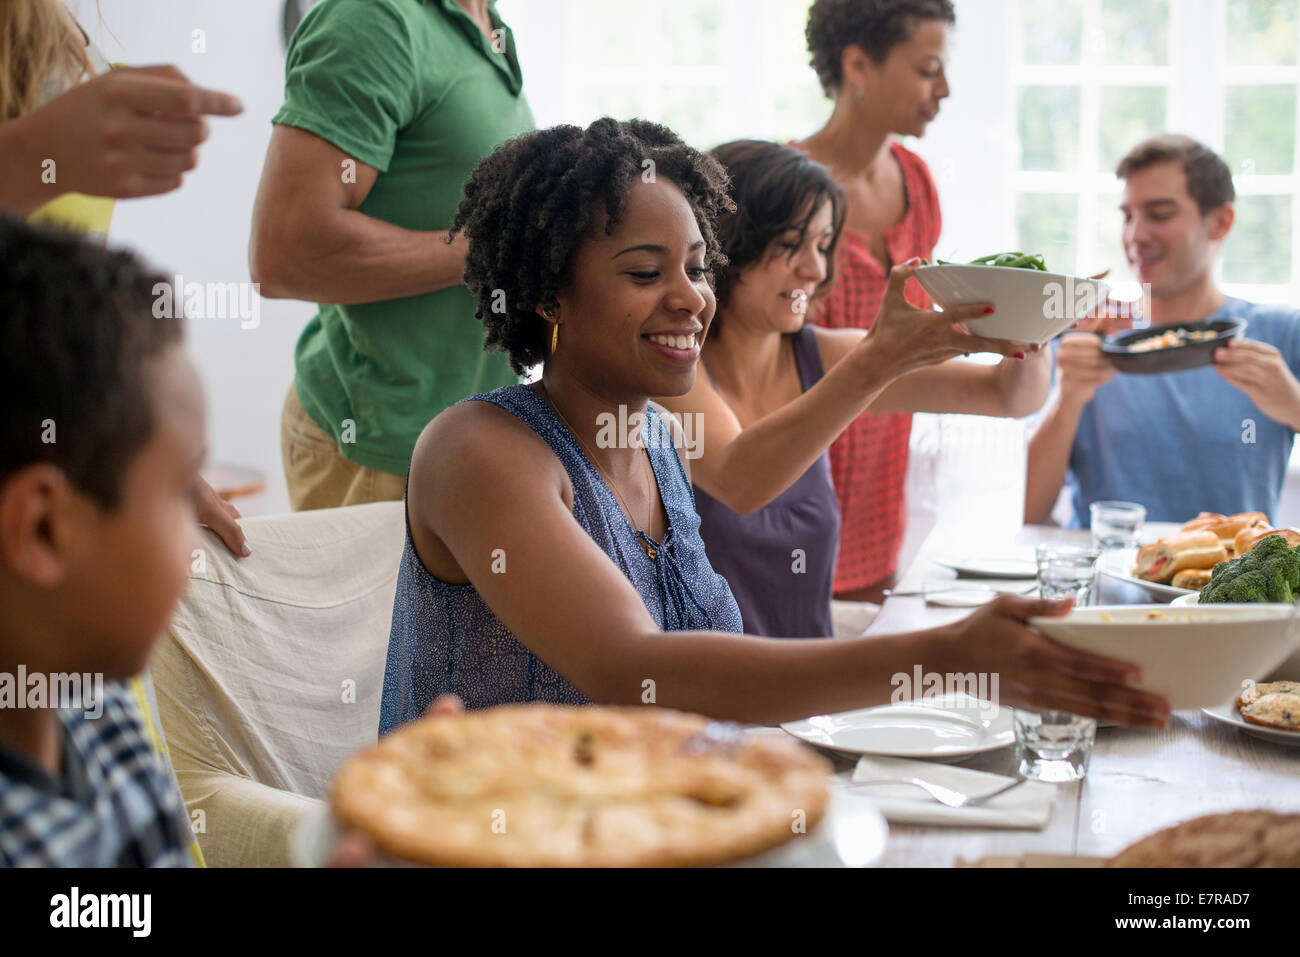 A family gathering, men, women and children around a dining table sharing a meal. Stock Photo